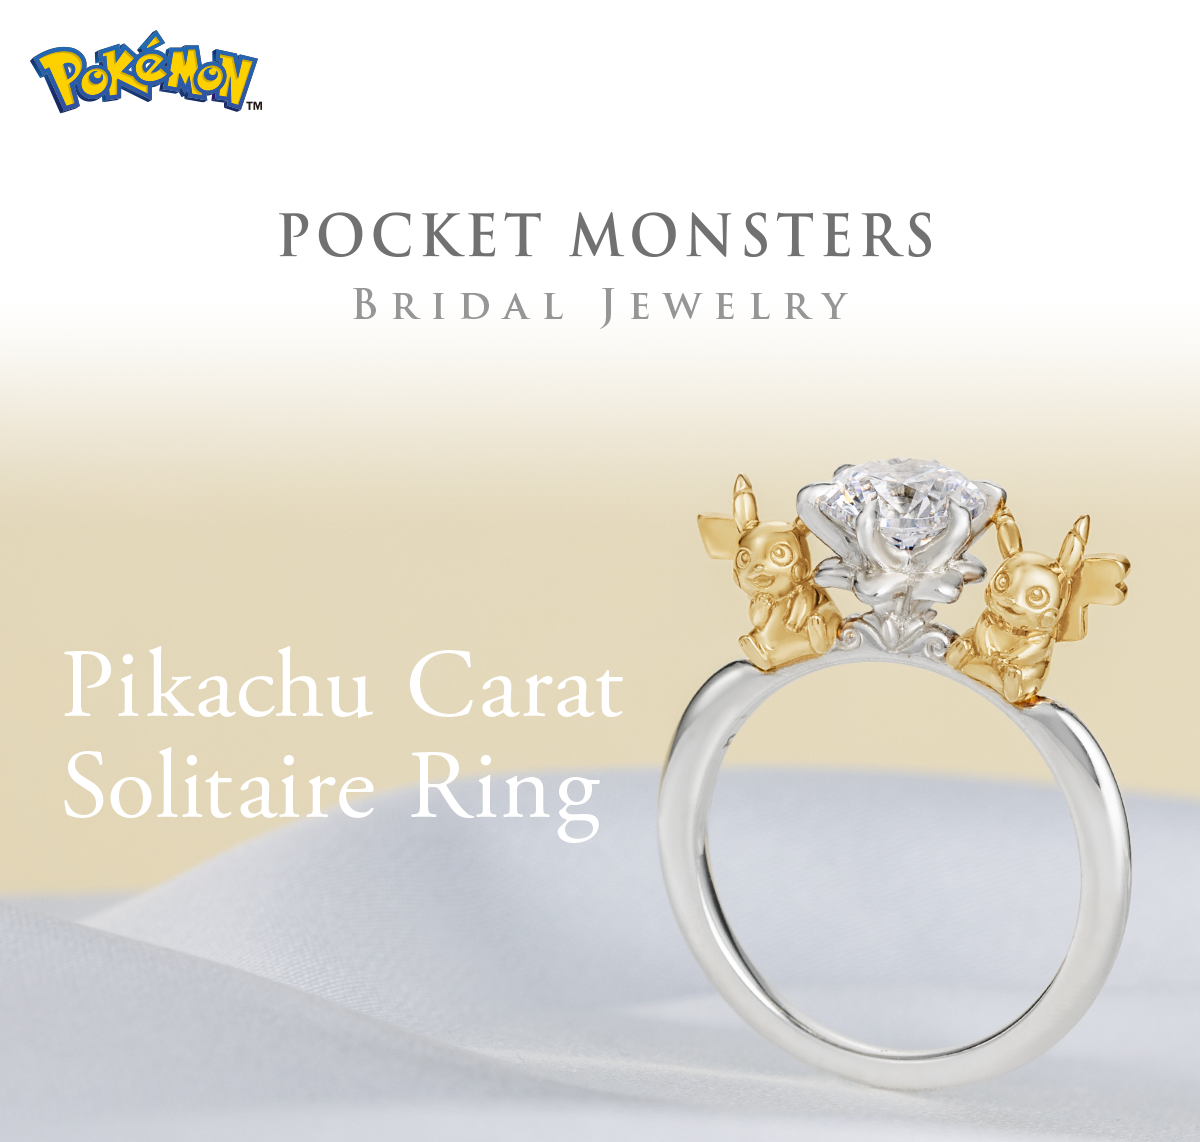 POCKET MONSTERS BRIDAL JEWELRY Pikachu Carat Solitaire Ring